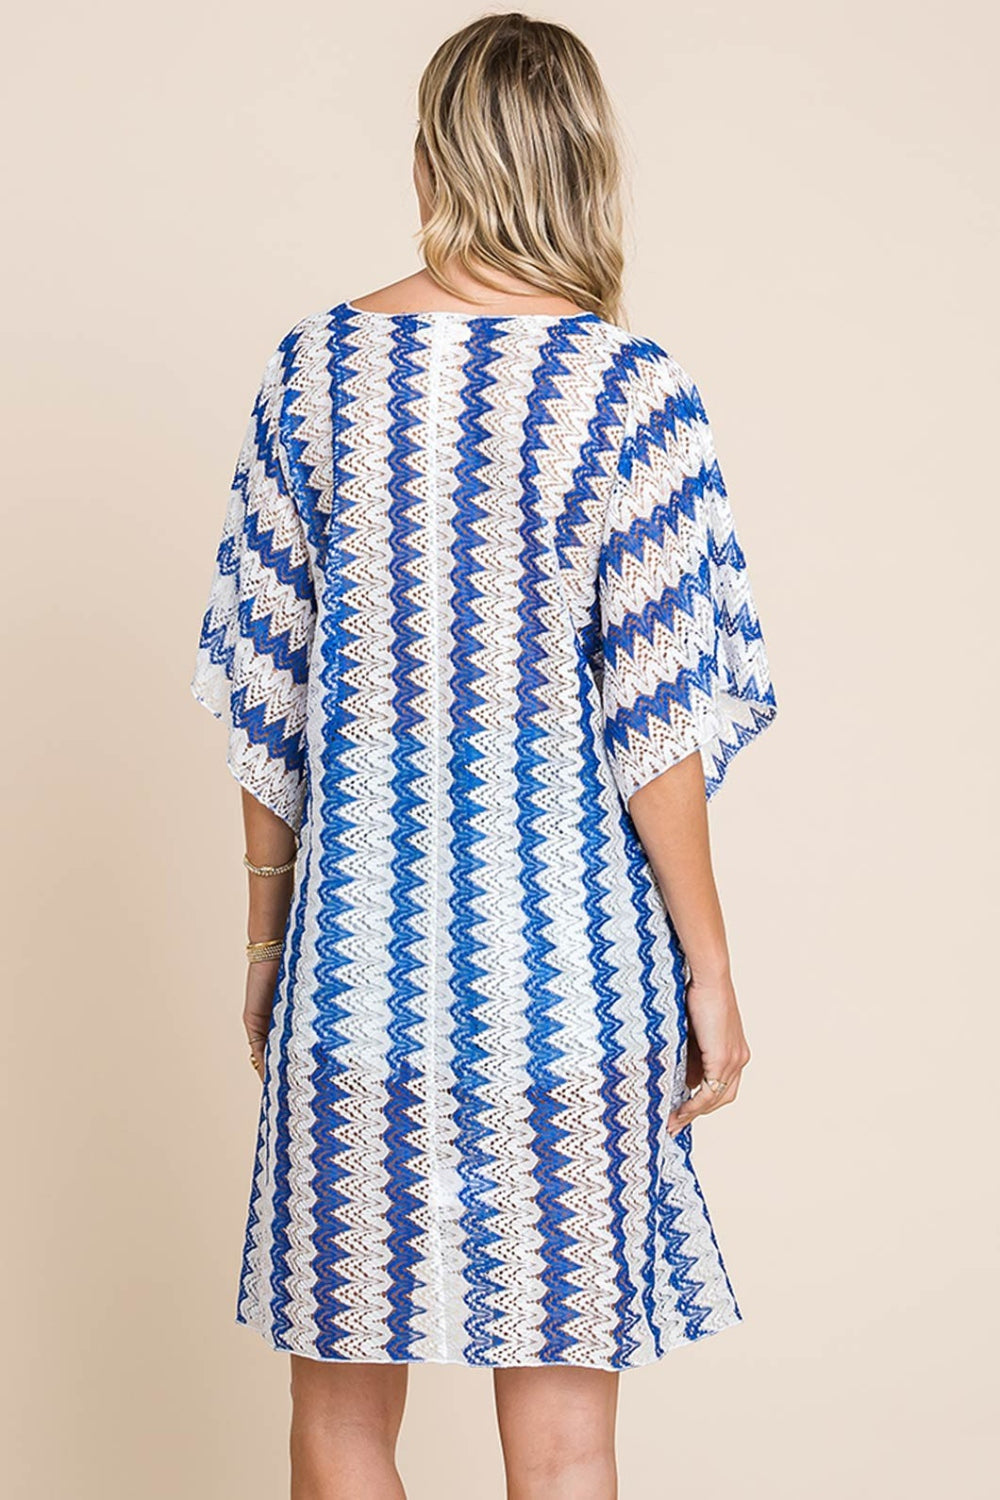 Sunset Vacation  Cotton Bleu by Nu Lab Tied Striped Plunge Half Sleeve Beach Cover Up Sunset and Swim   